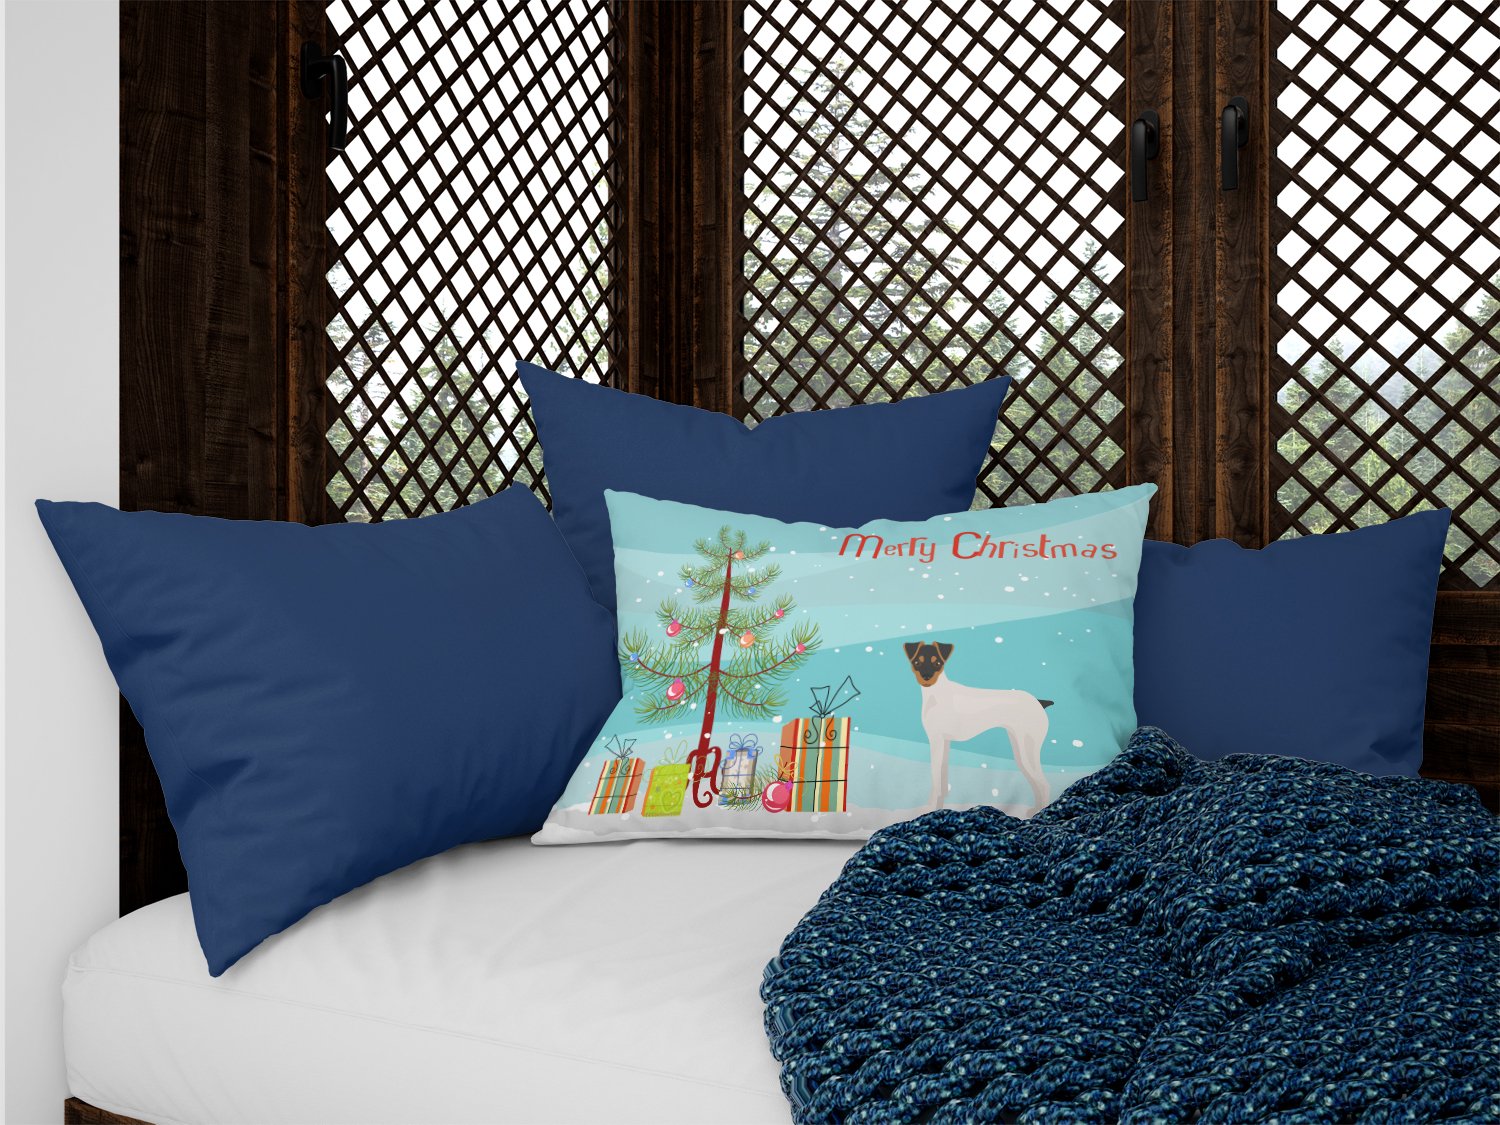 Japanese Terrier Christmas Tree Canvas Fabric Decorative Pillow CK3464PW1216 by Caroline's Treasures